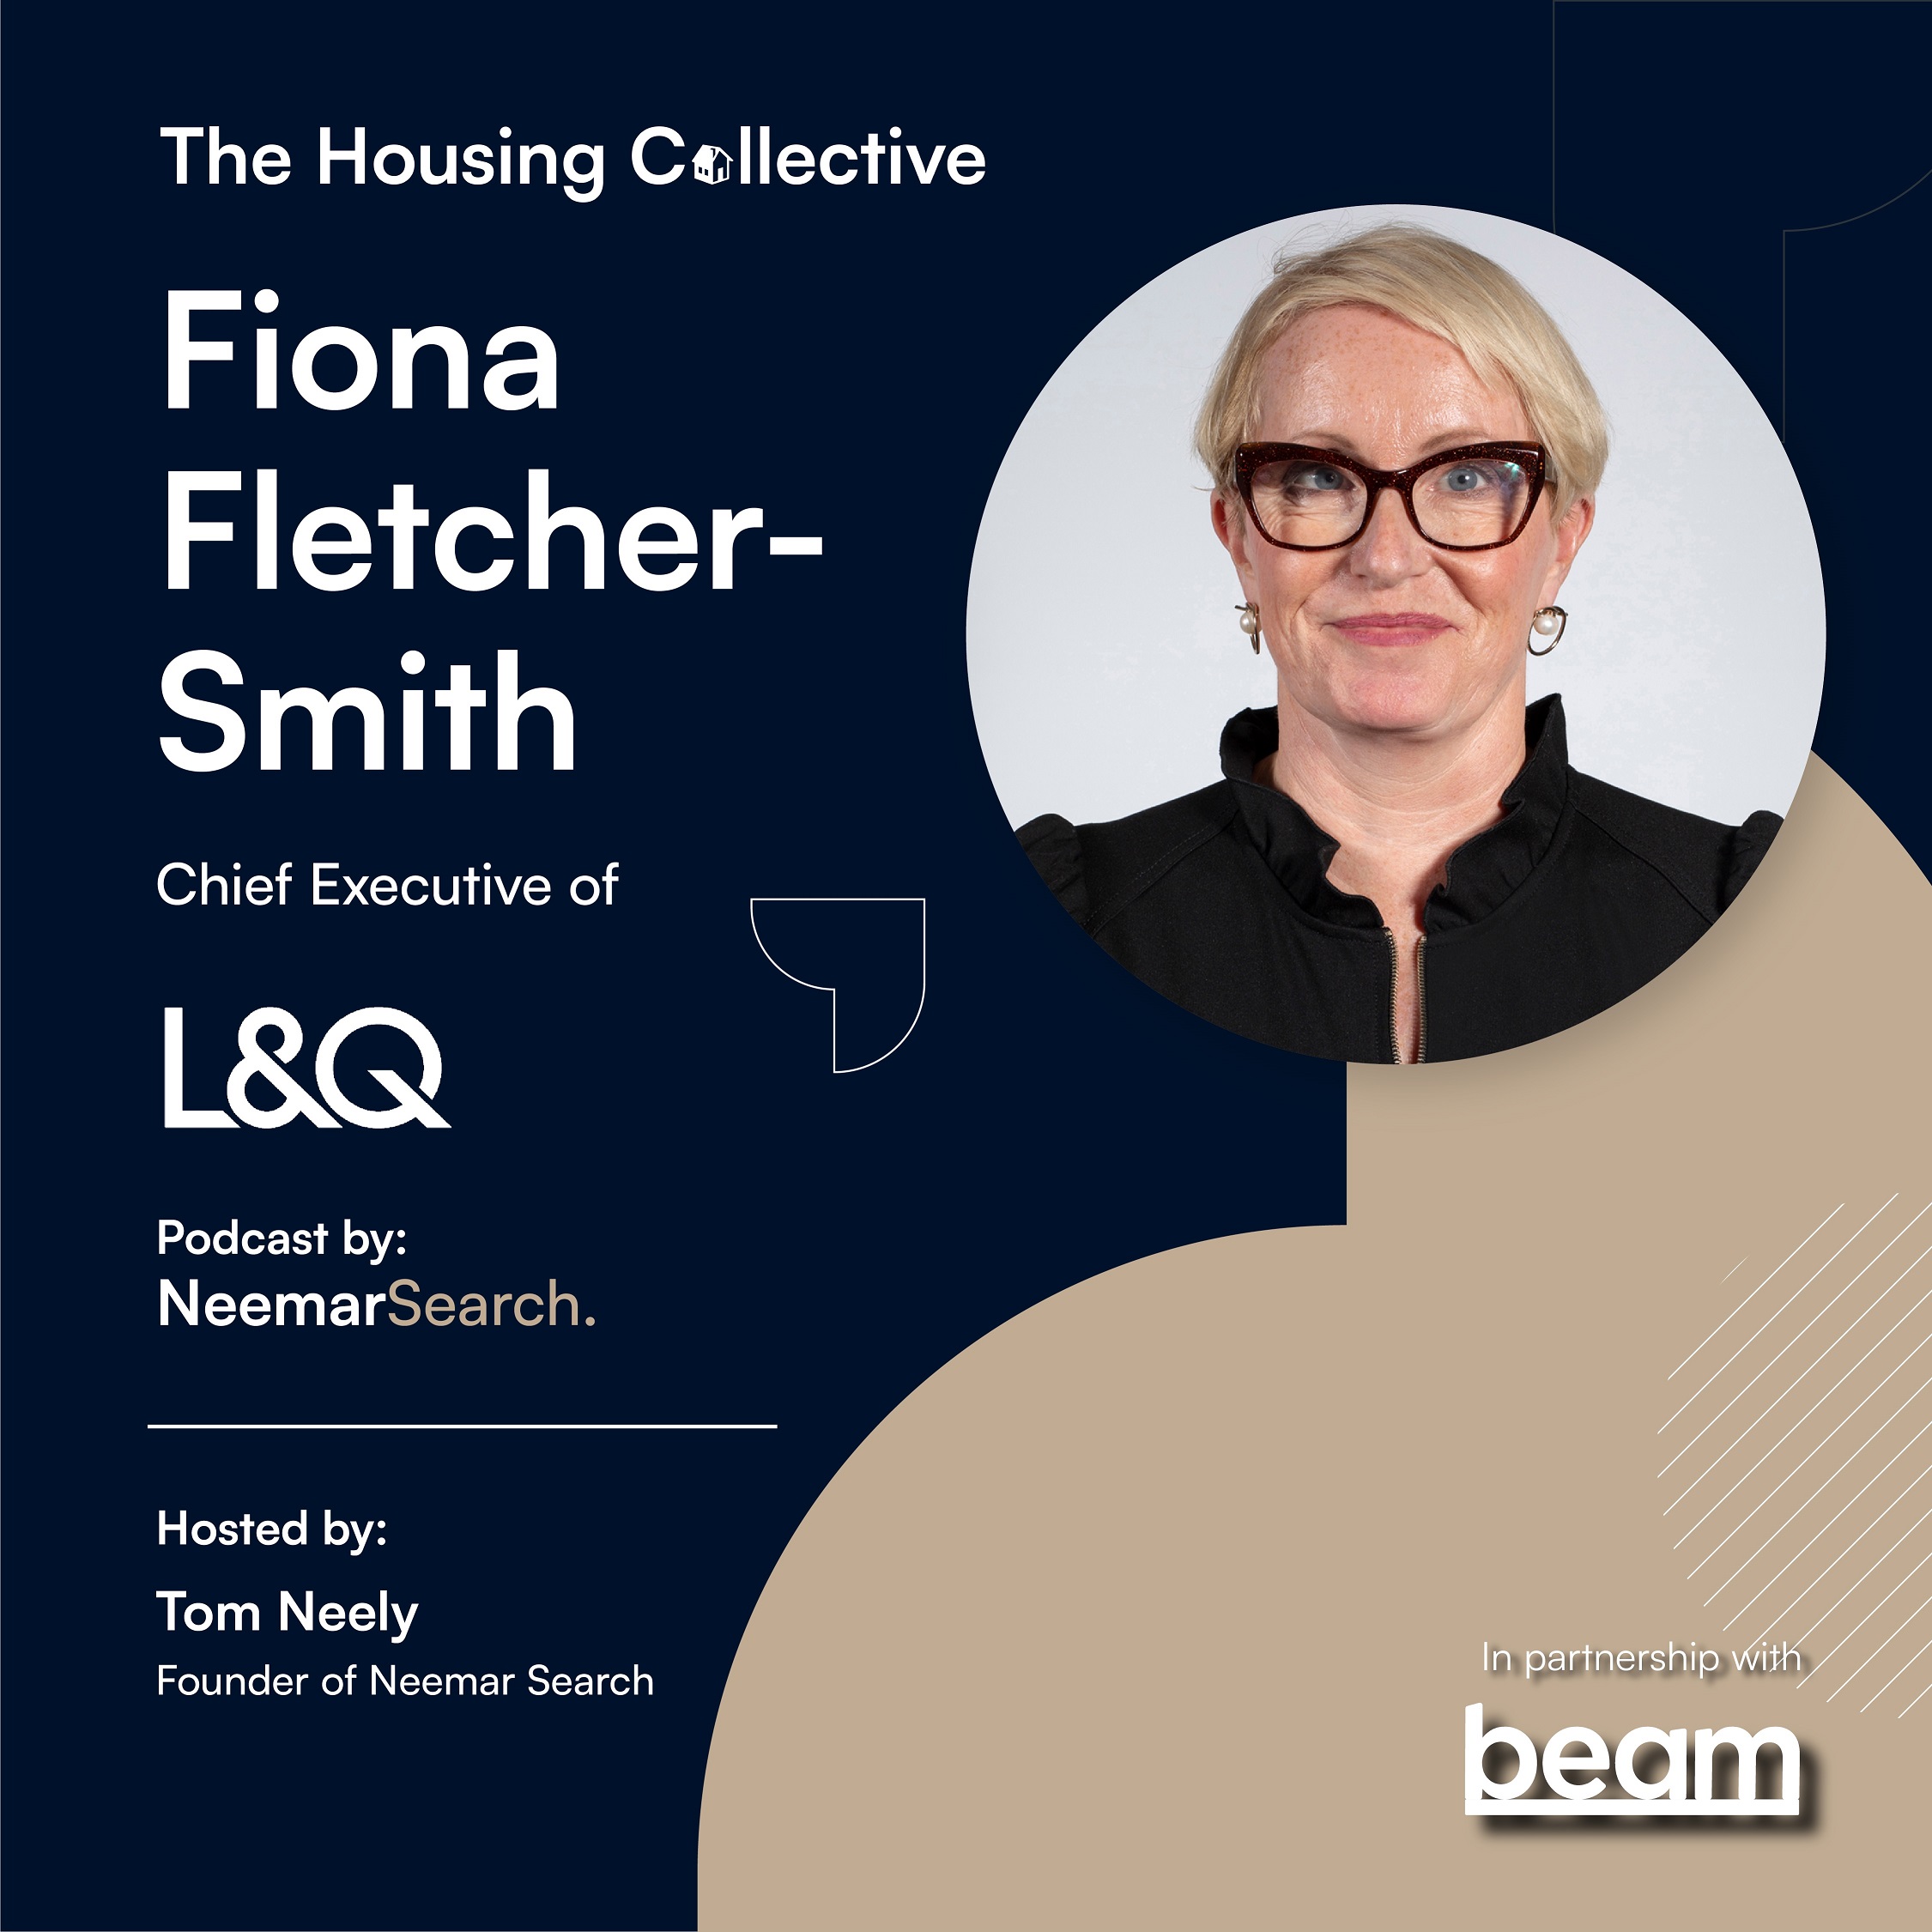 The Housing Collective: Changing the Face of Leadership to Reflect Diversity